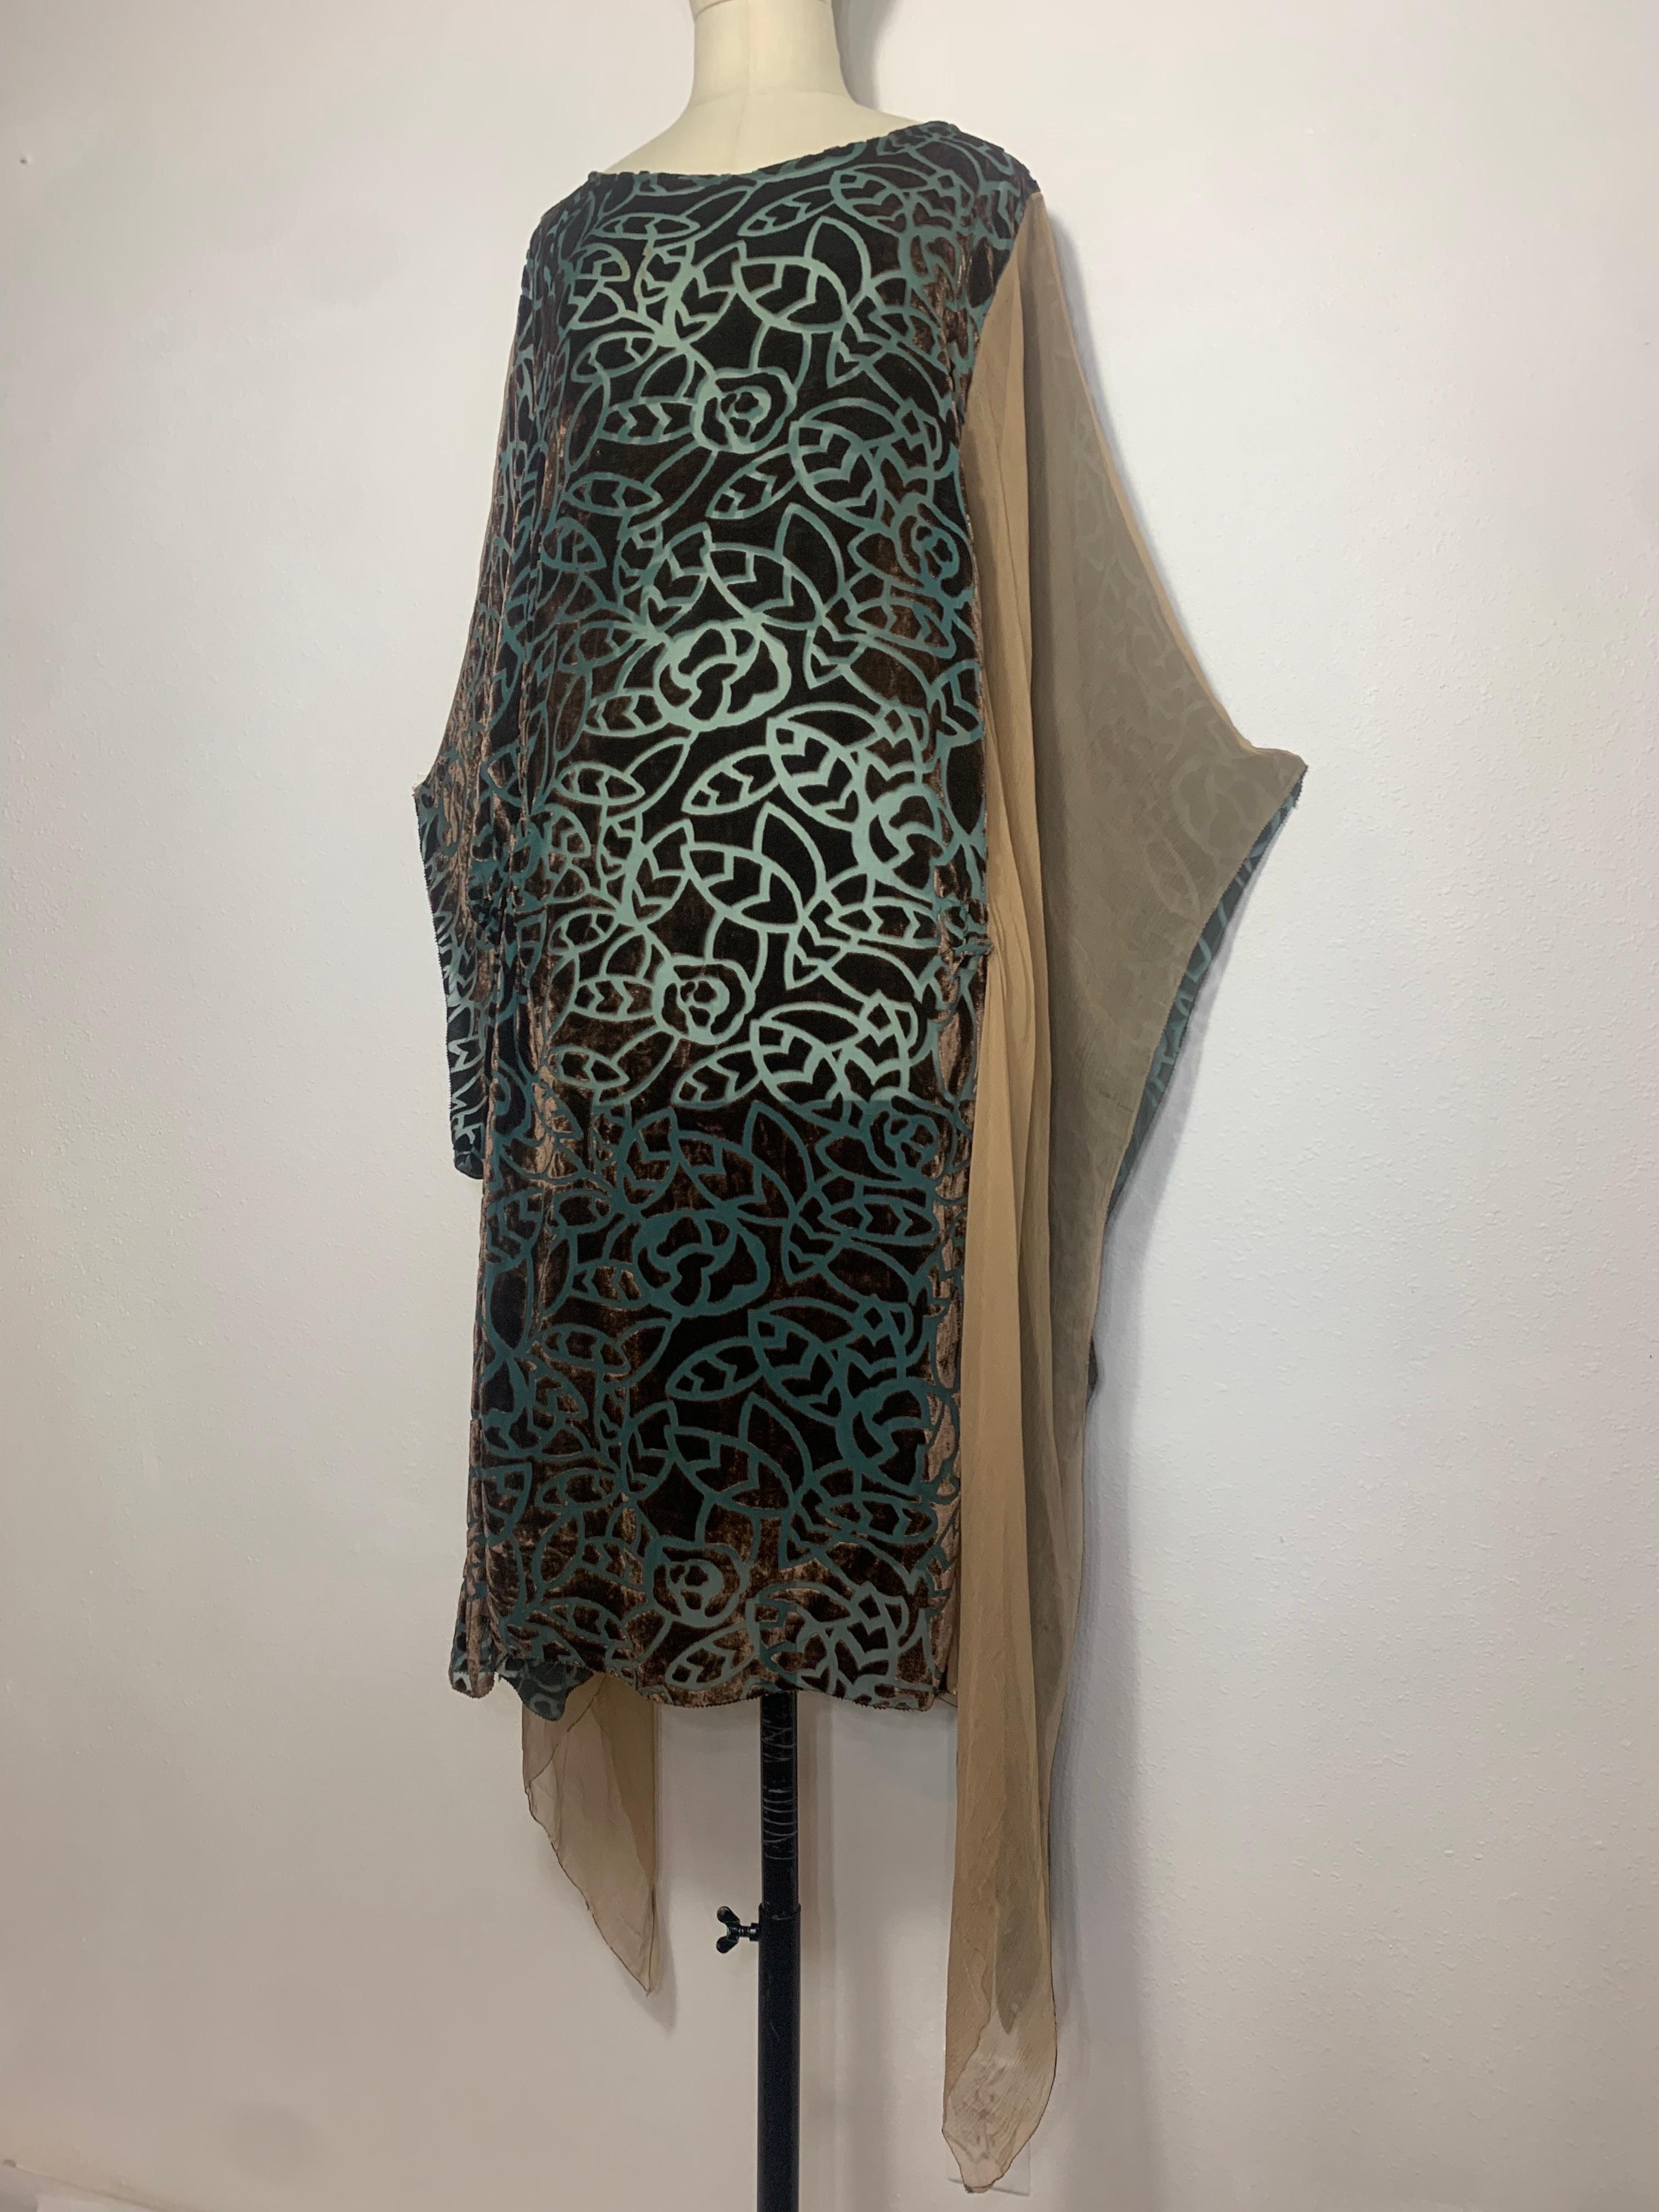 1920s Art Deco Patina Green & Taupe Devore Velvet Tunic Dress w Stylized Leaf Pattern:  Unusual construction is closed on one side and open, tabard-style on other.  Kimono sleeves. Diaphanous and fluid in movement in a rare color palette.  Fits a